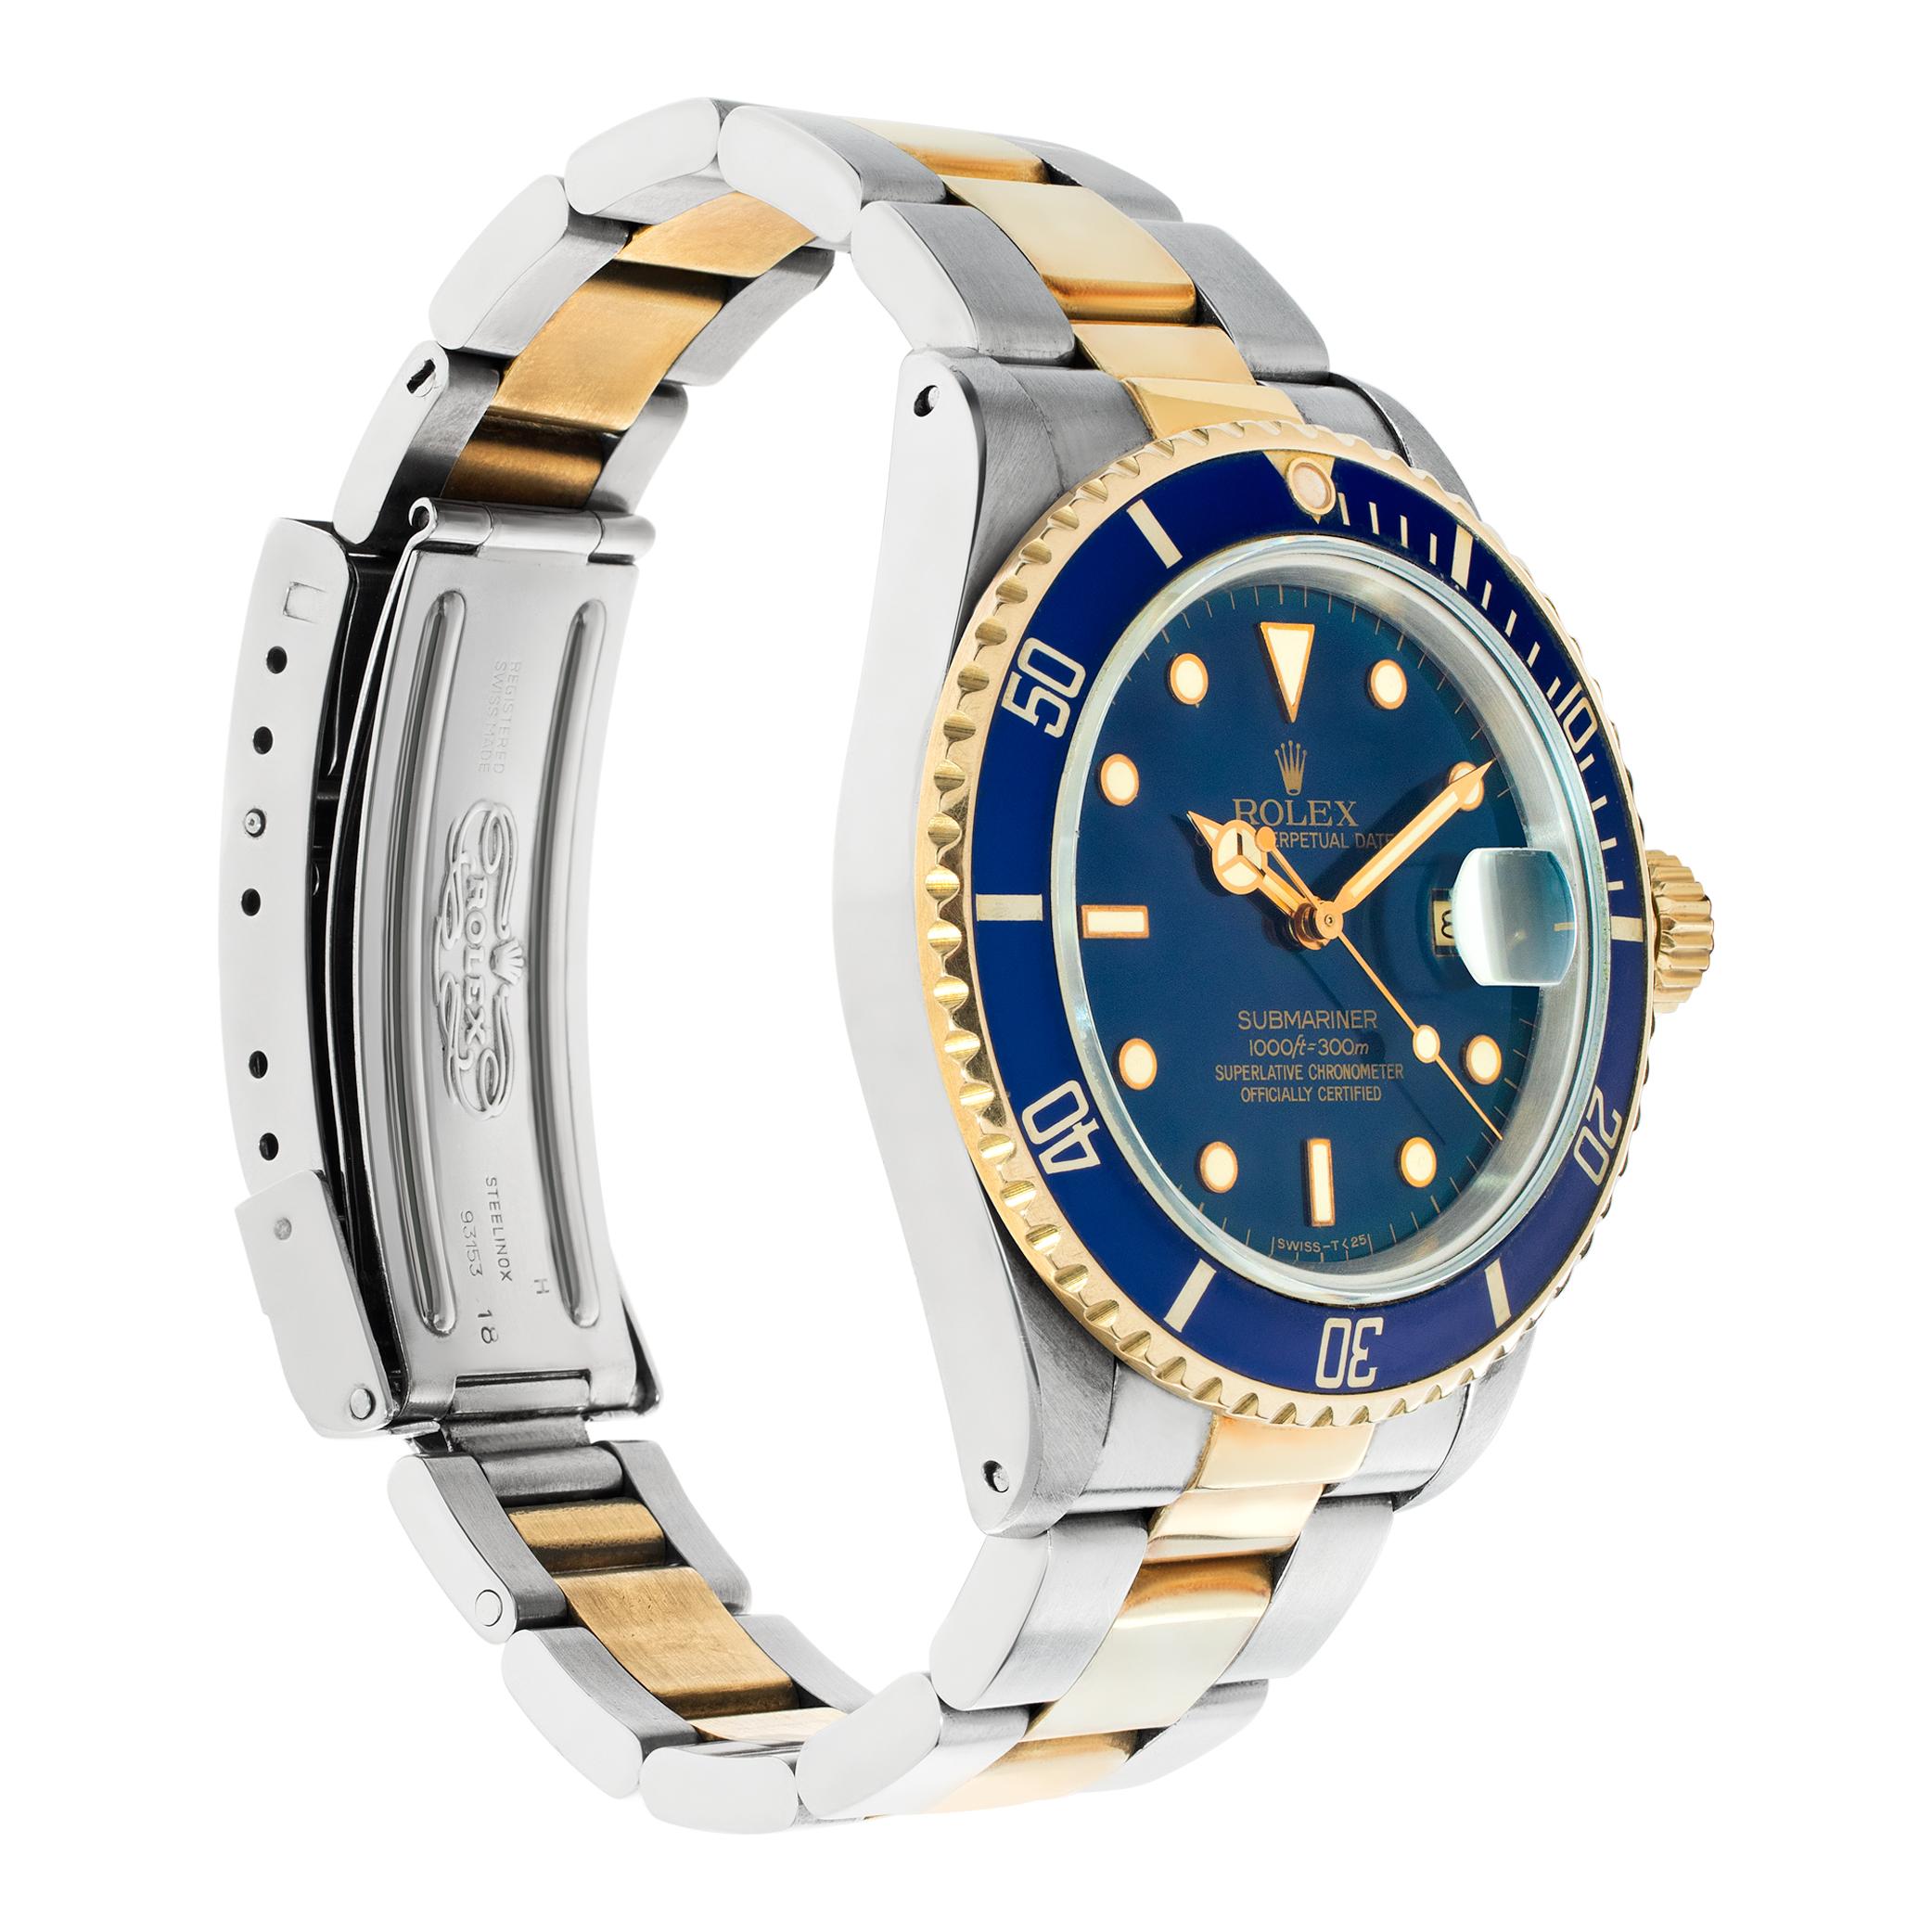 Rolex Submariner 18k yellow gold stainless steel Automatic Wristwatch Ref 16803 In Excellent Condition For Sale In Surfside, FL